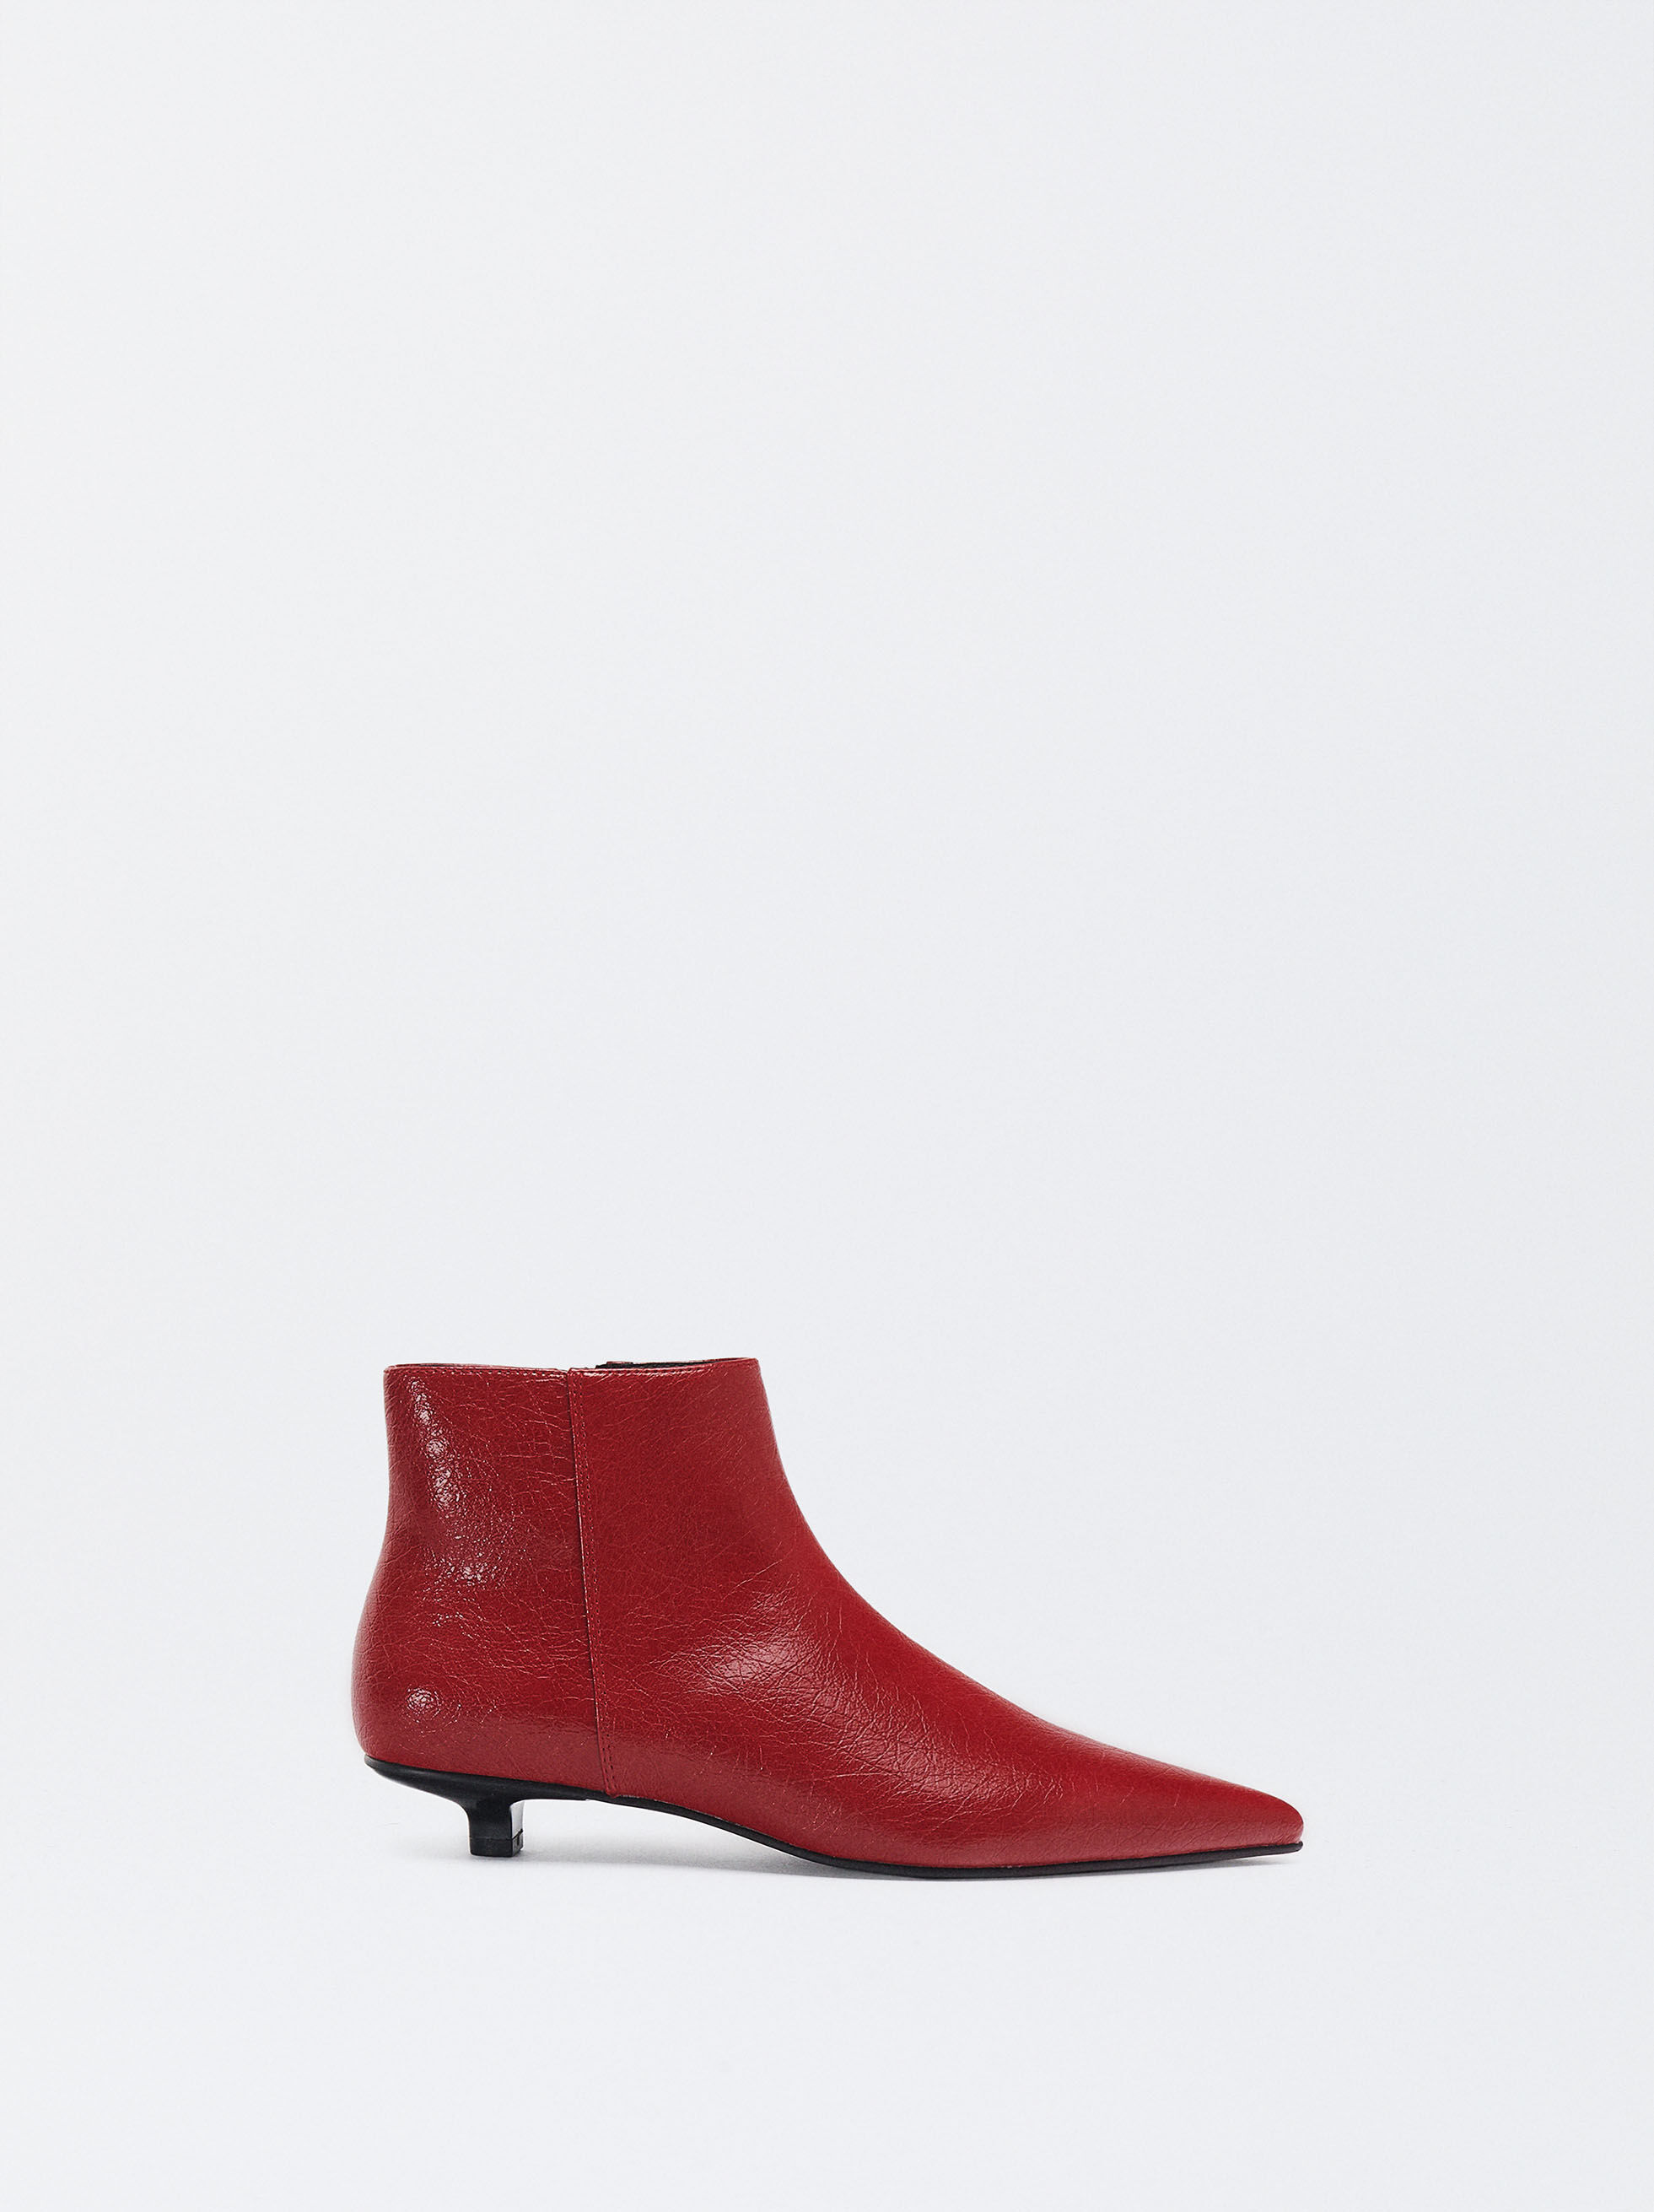 SOFT LEATHER HIGH HEELED ANKLE BOOTS - Black | ZARA United States